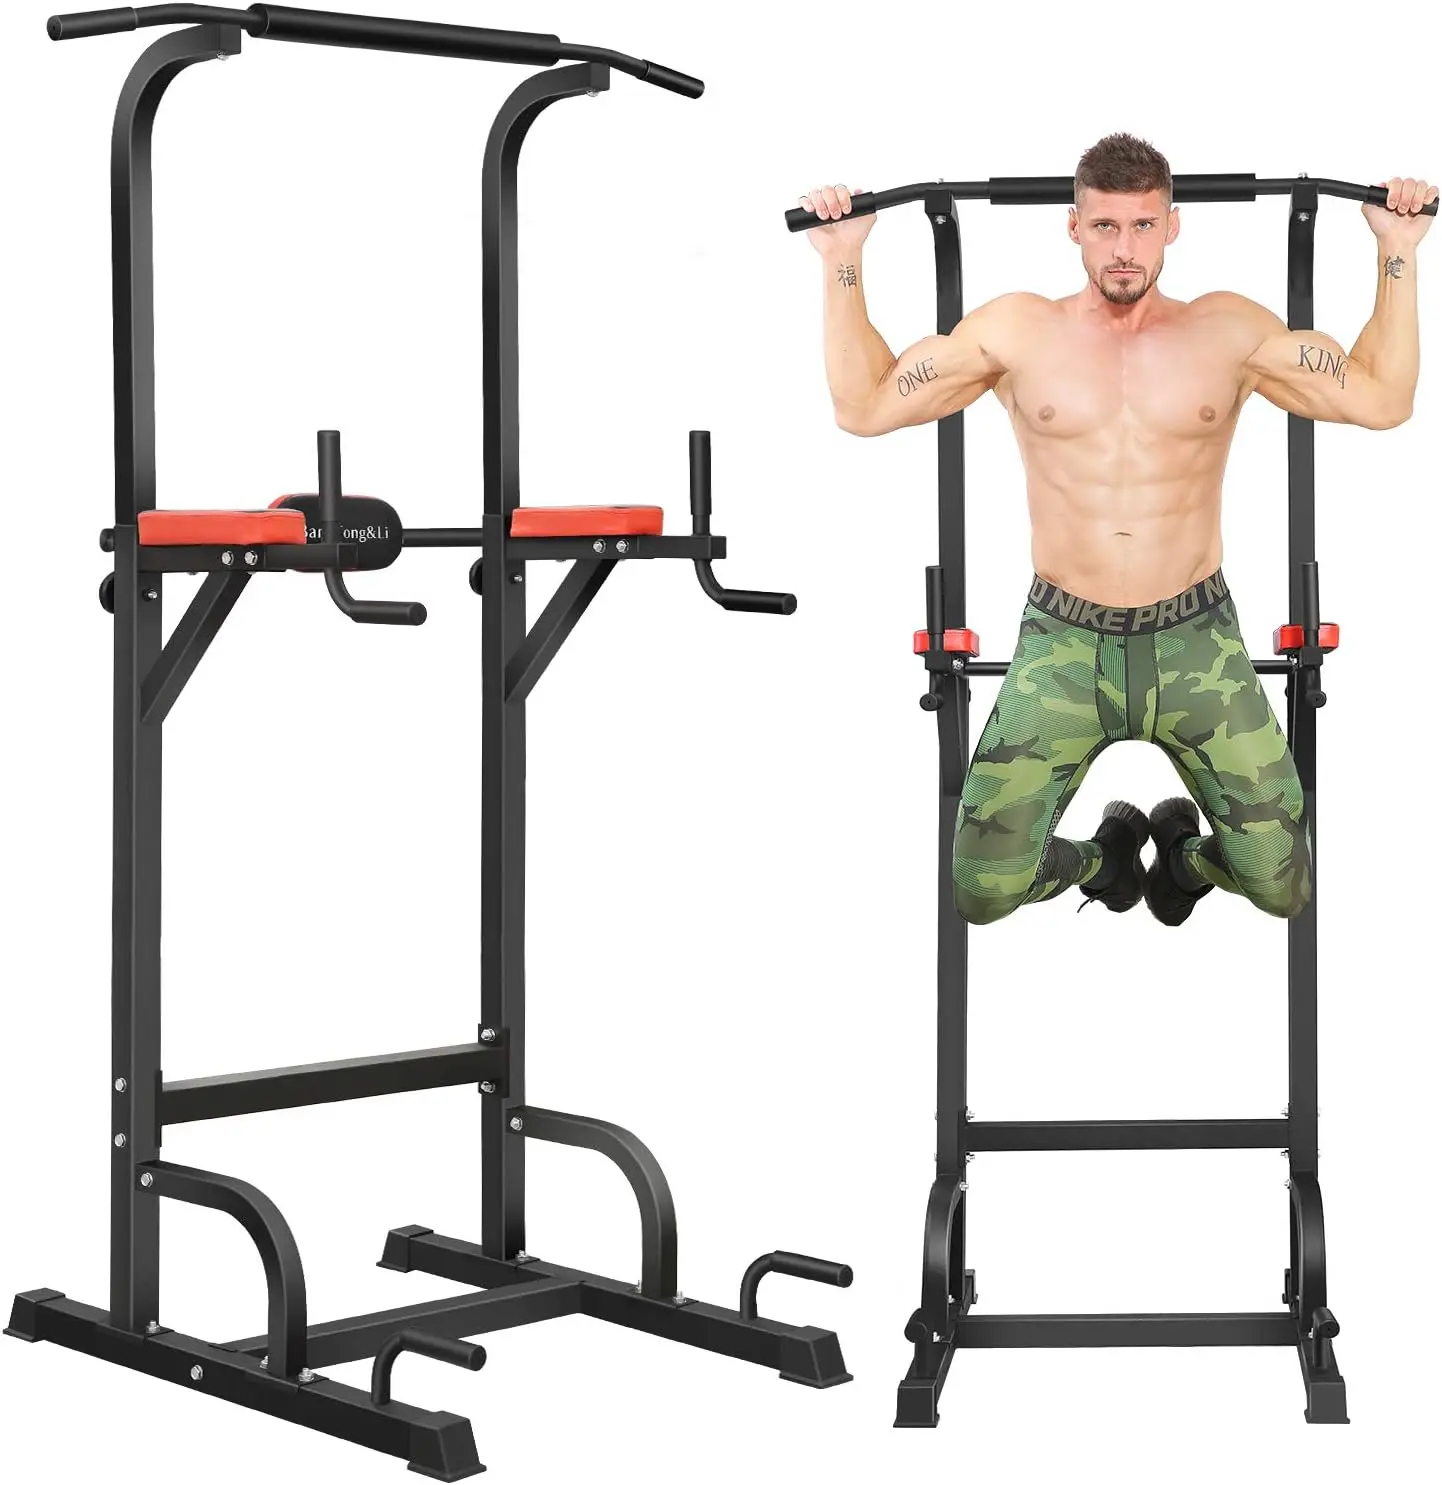 

, BangTong&Li Pull Up Bar Dip Station/stand for Home Gym Strength Training Workout Equipment Dumbbell pairs Lb dumbell pair Gym